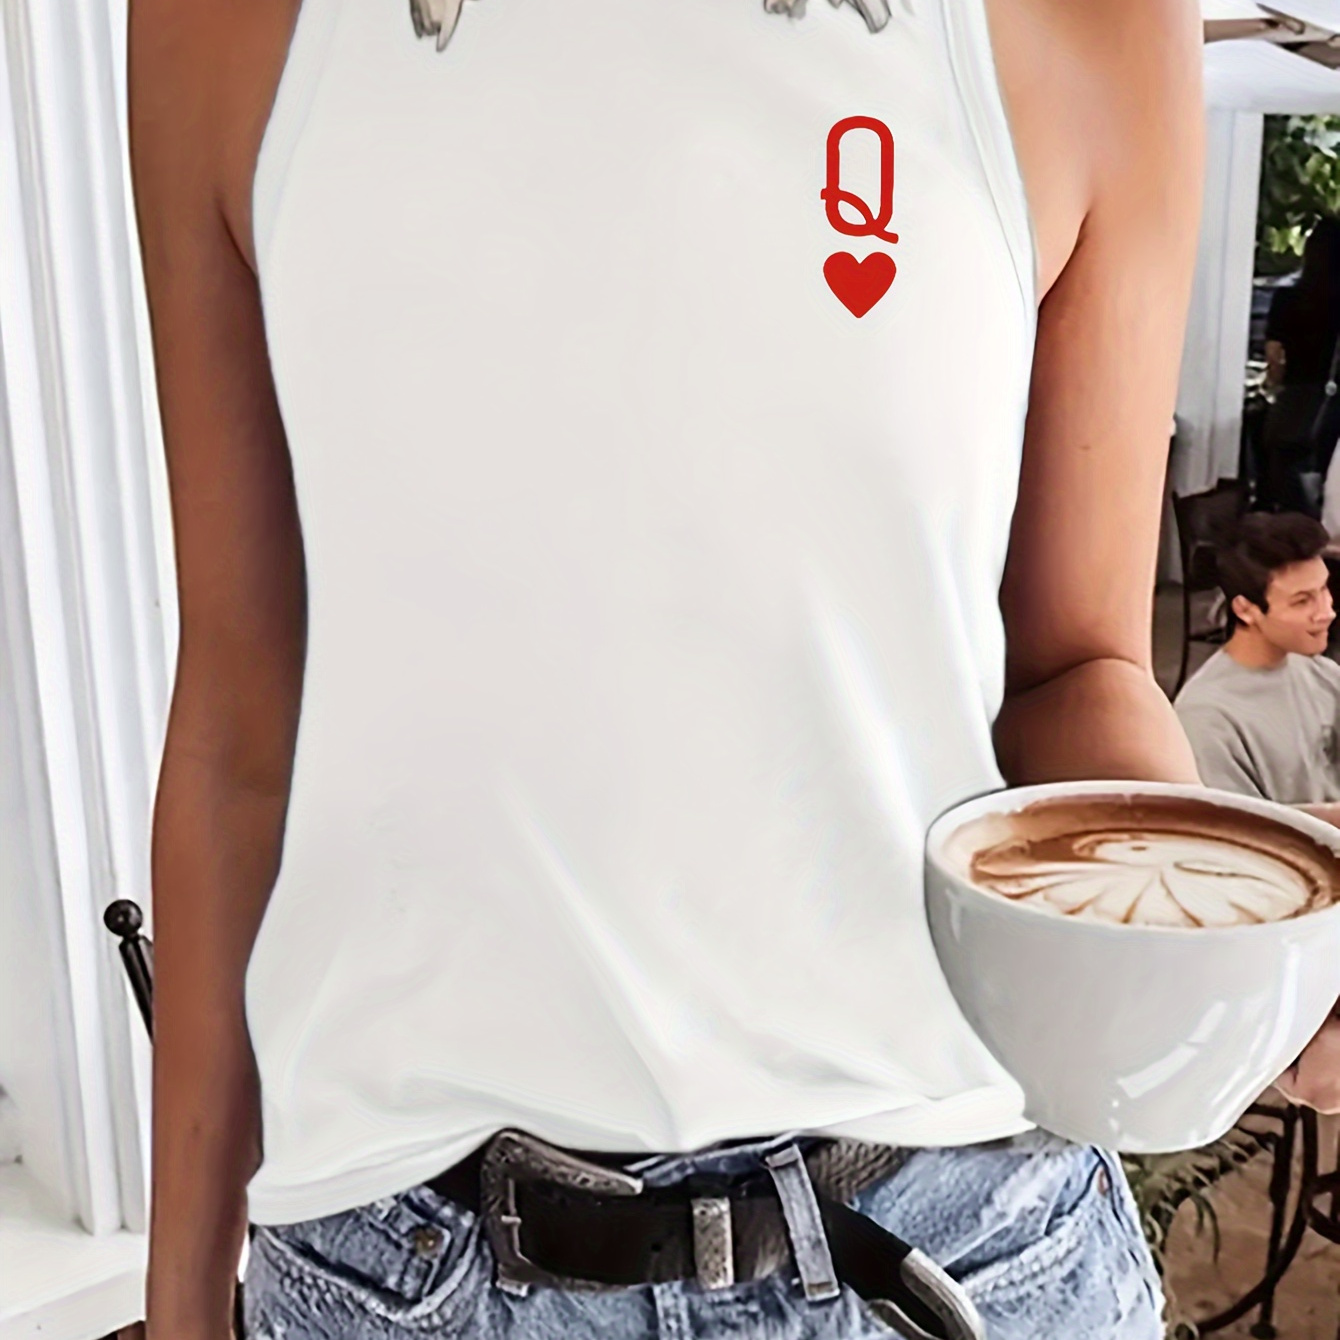 

Q & Heart Graphic Print Tank Top, Sleeveless Casual Top For Summer & Spring, Women's Clothing